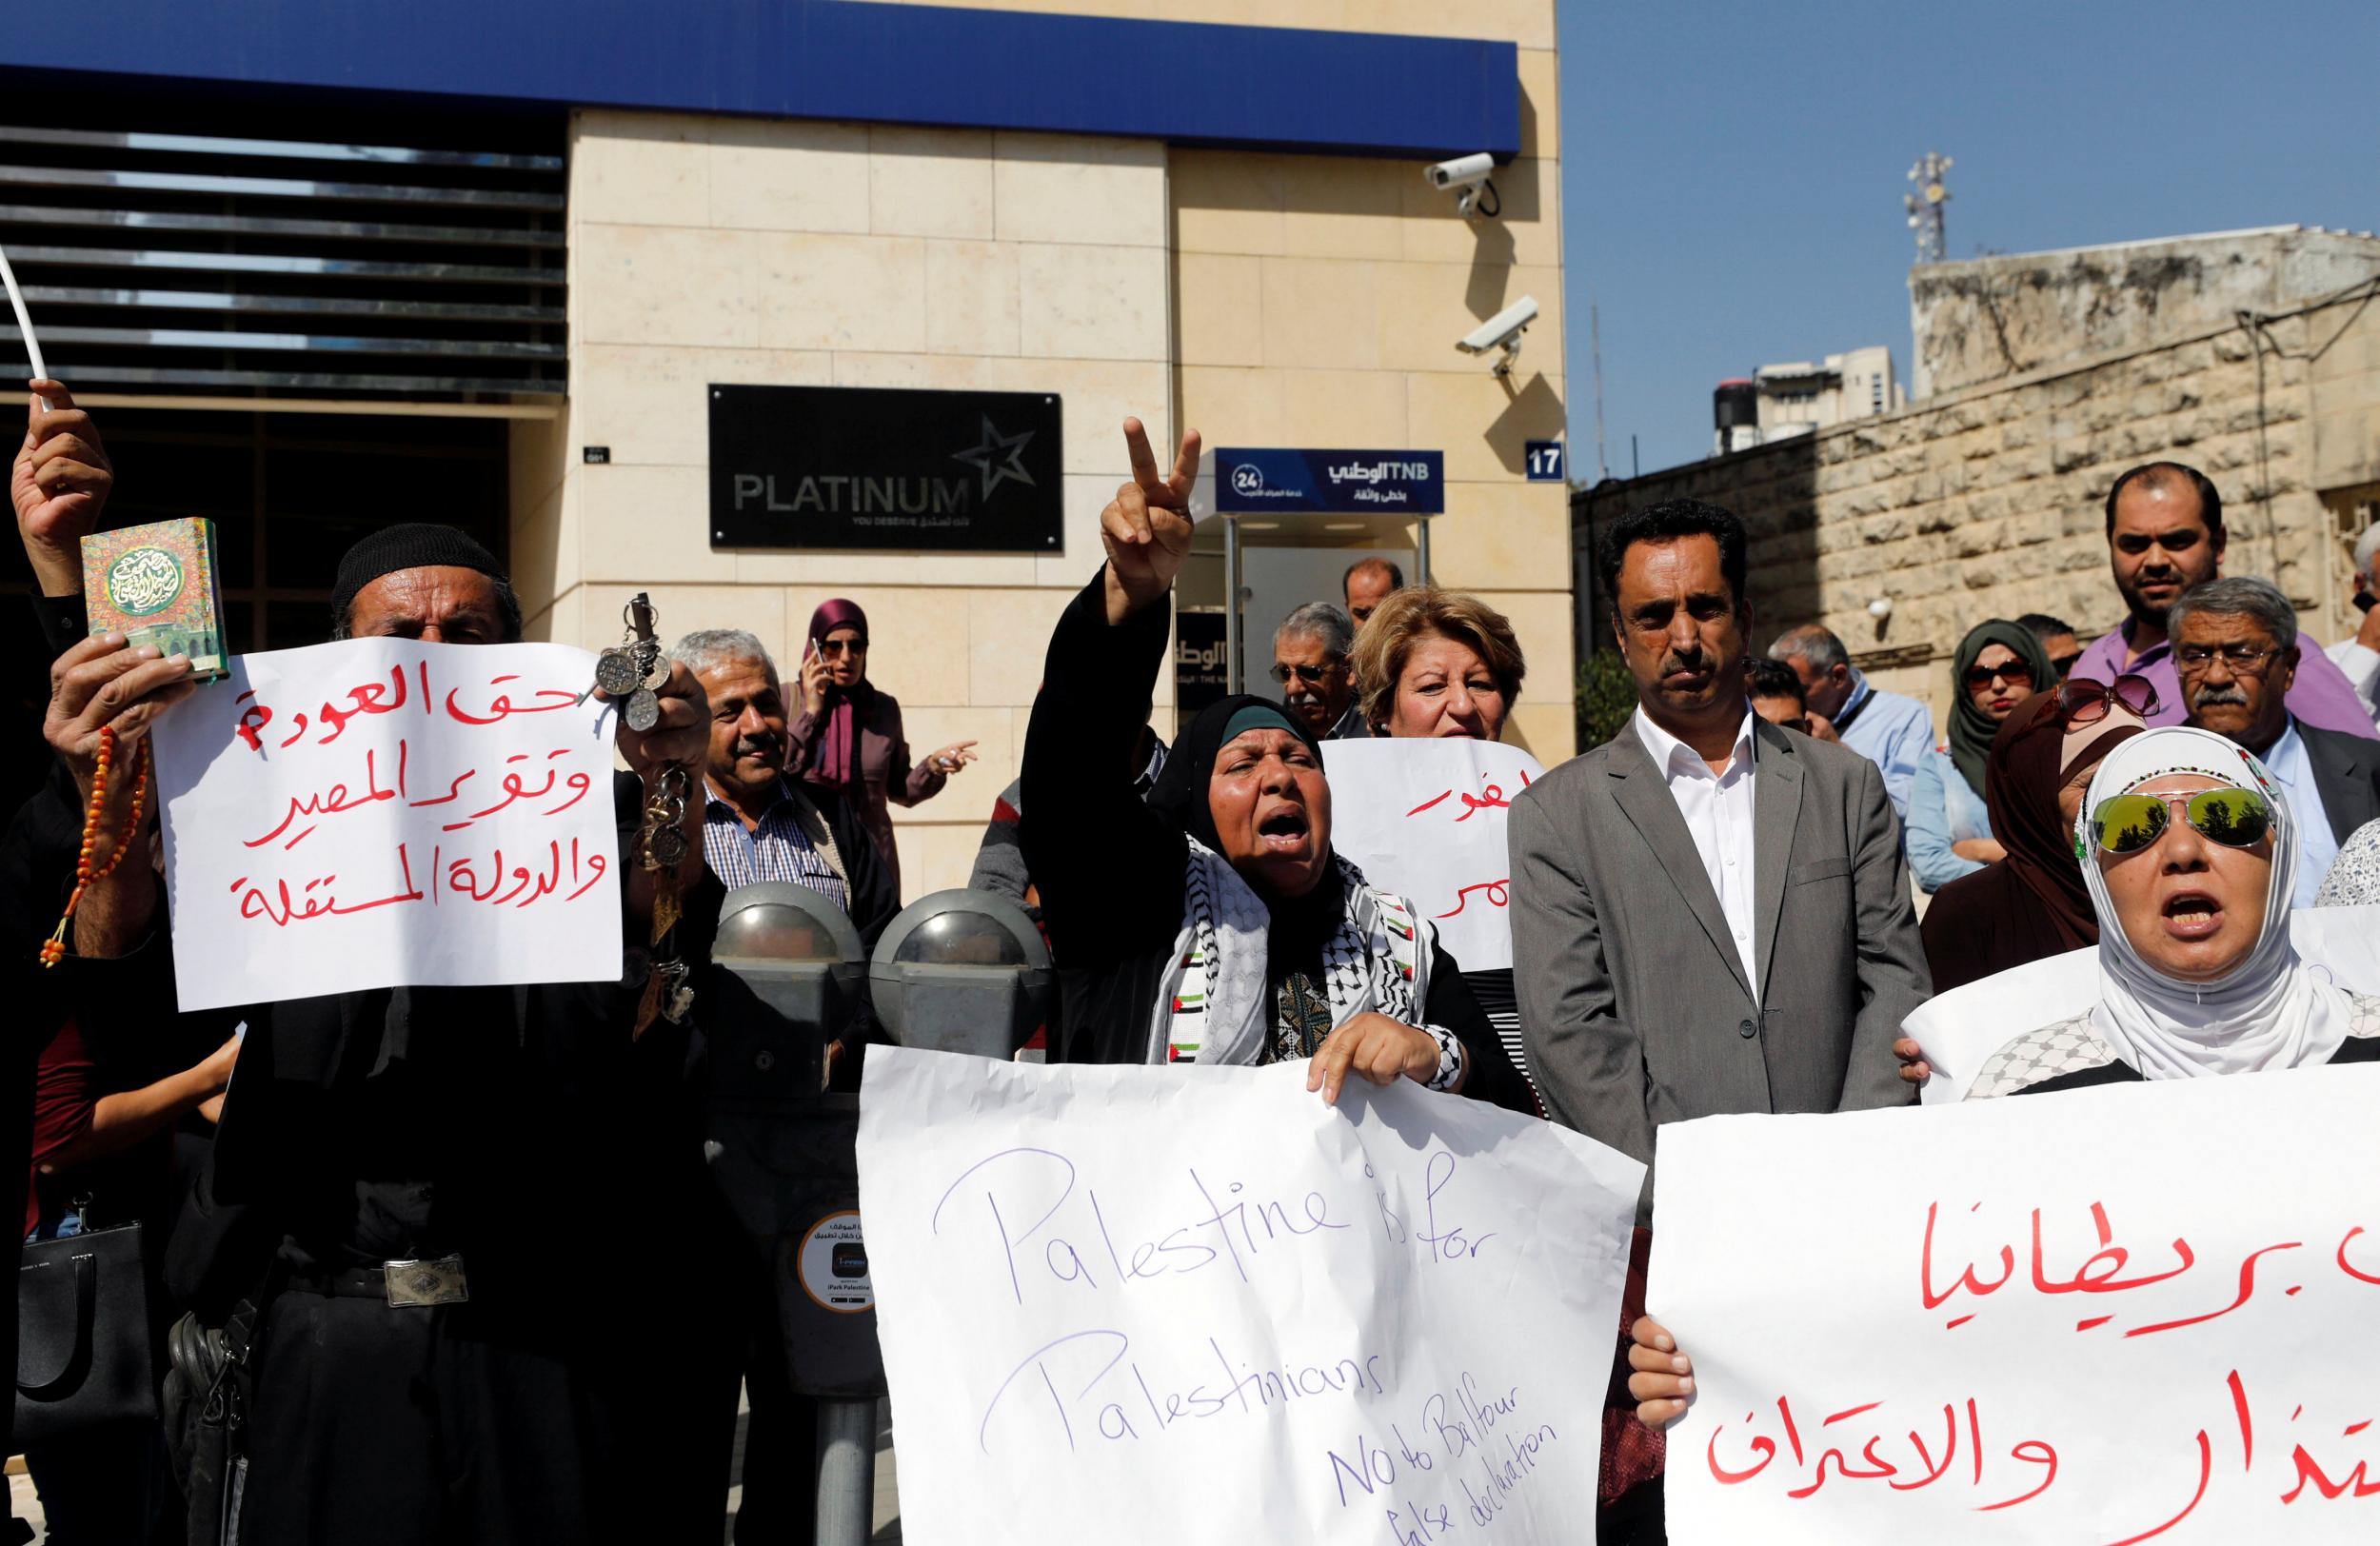 Palestinians take part in a protest calling on Britain to apologise for the Balfour Declaration in the West Bank city of Ramallah on 18 October 2017